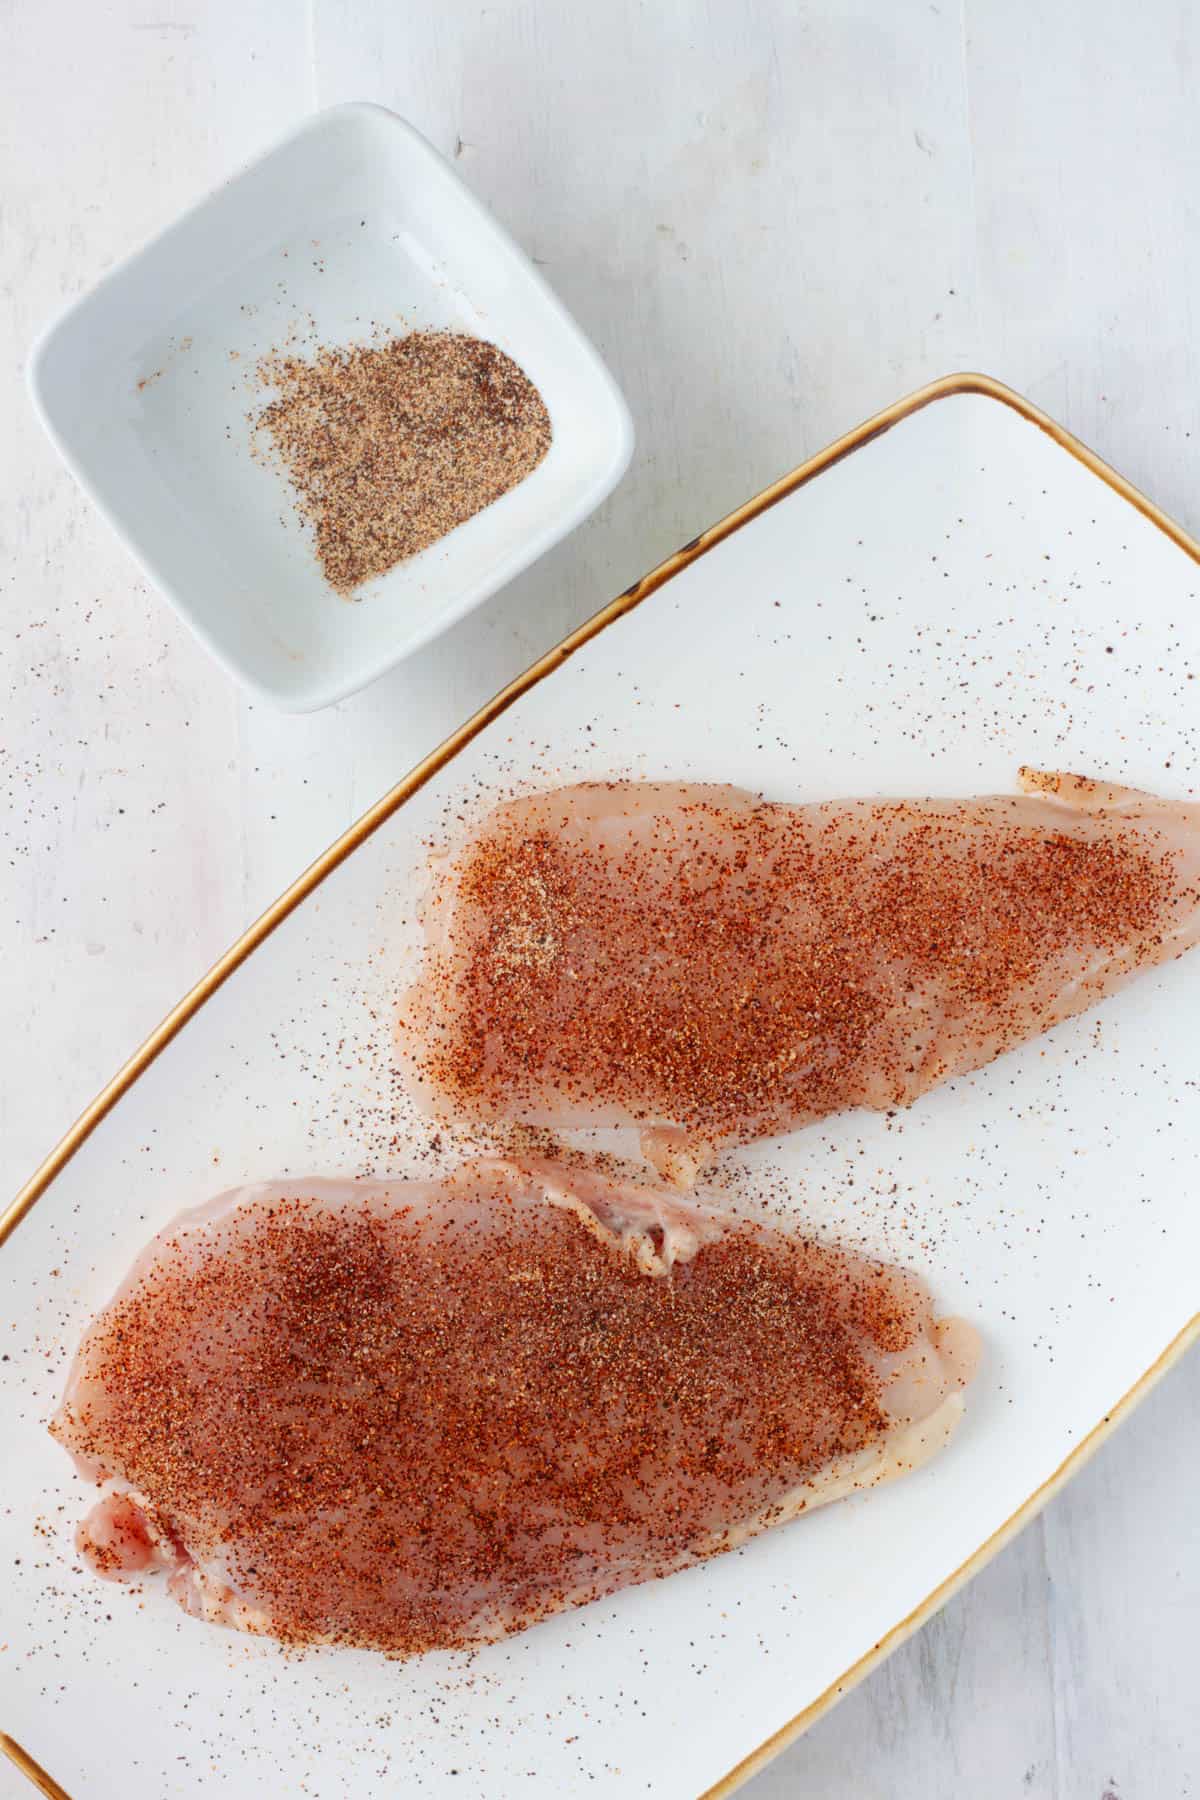 Chicken breasts sprinkled with a spice rub.